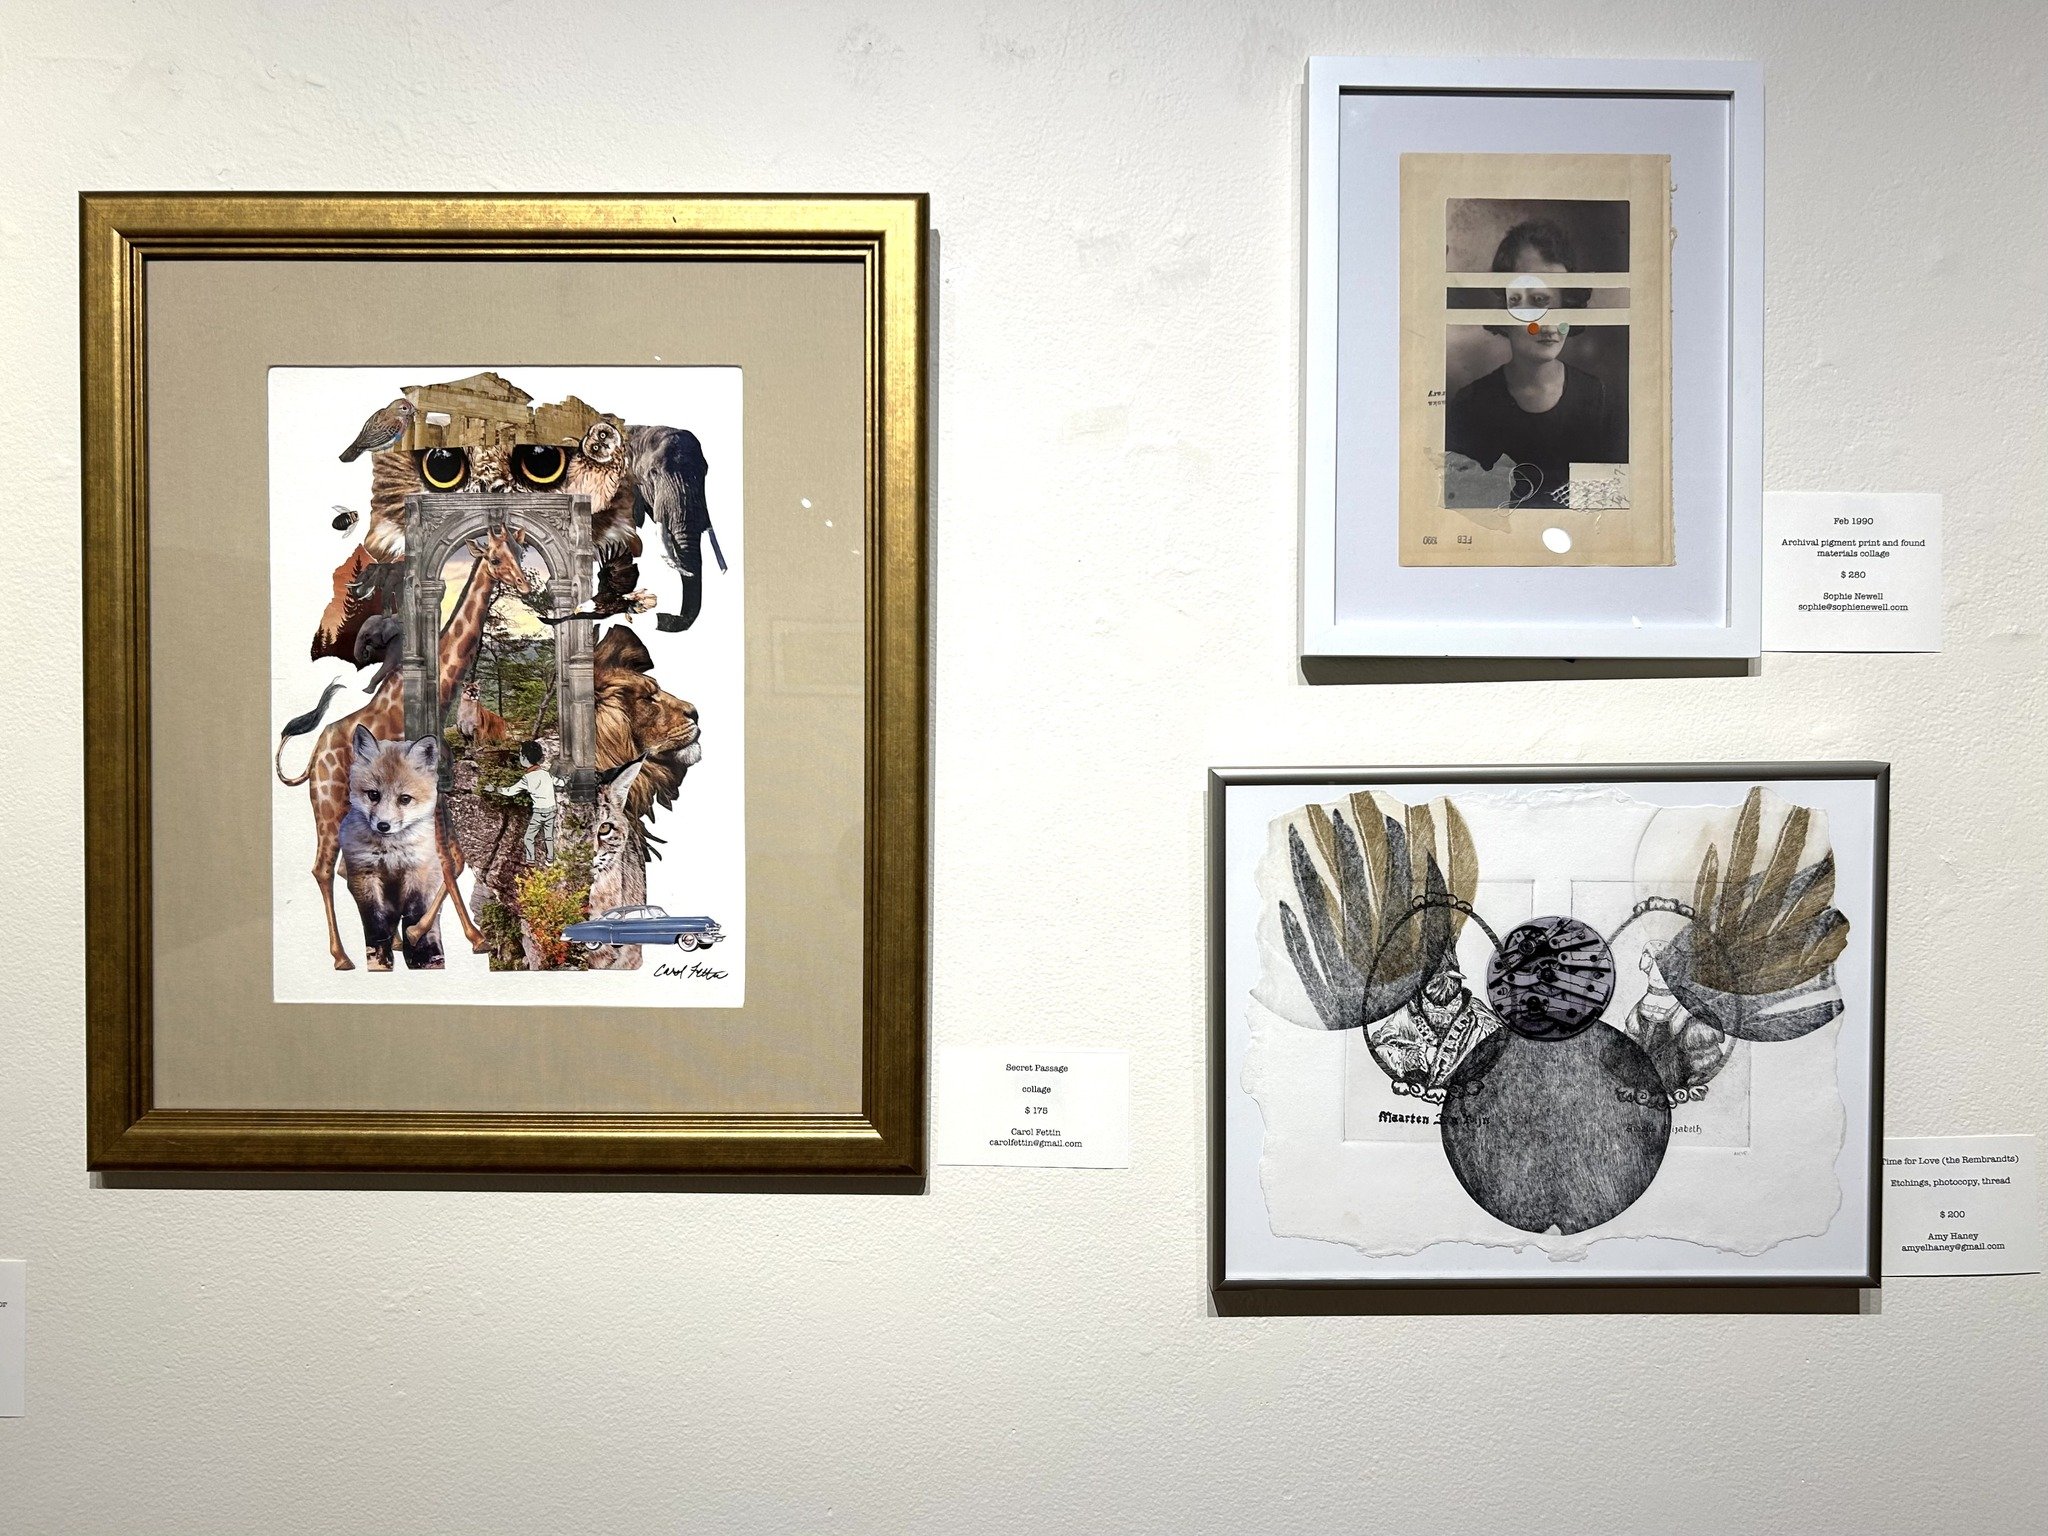 It's the last week to see the @collage_nebraska exhibit at @hotshopsartcenter. Enjoy these pieces by @carolfettin , @sophienewell_studio and @amyehaney along with more than 20 additional artists' work. The gallery is open until 5 p.m. every day. Arti